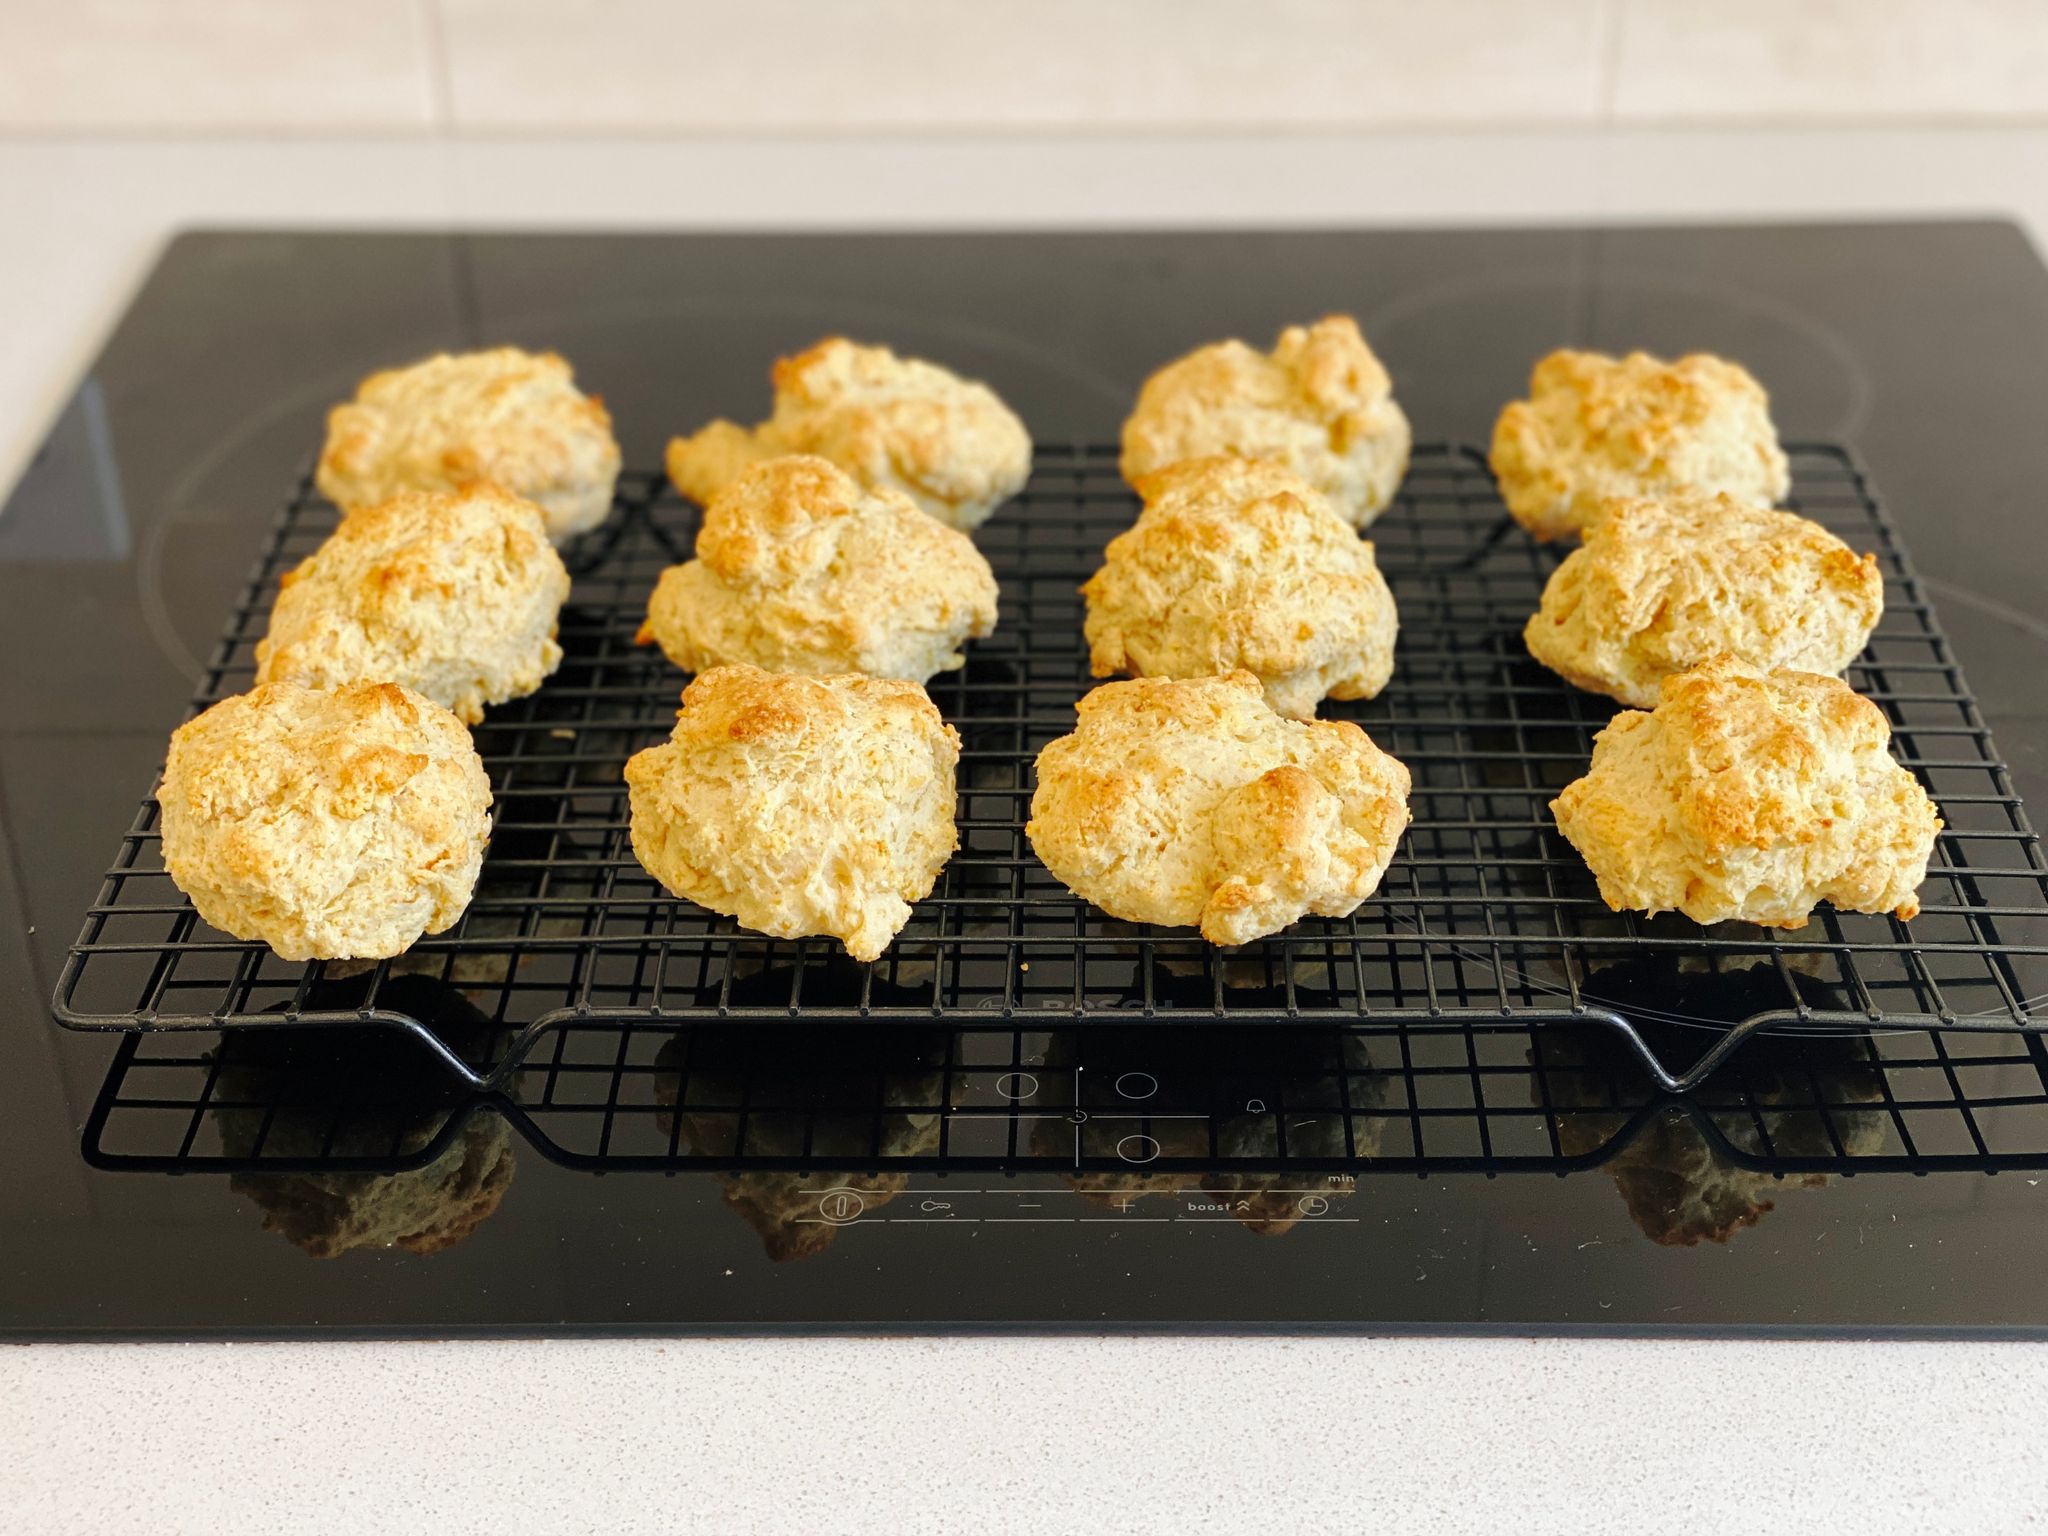 A photo of what look like essentially scones sitting on a cooling rack.